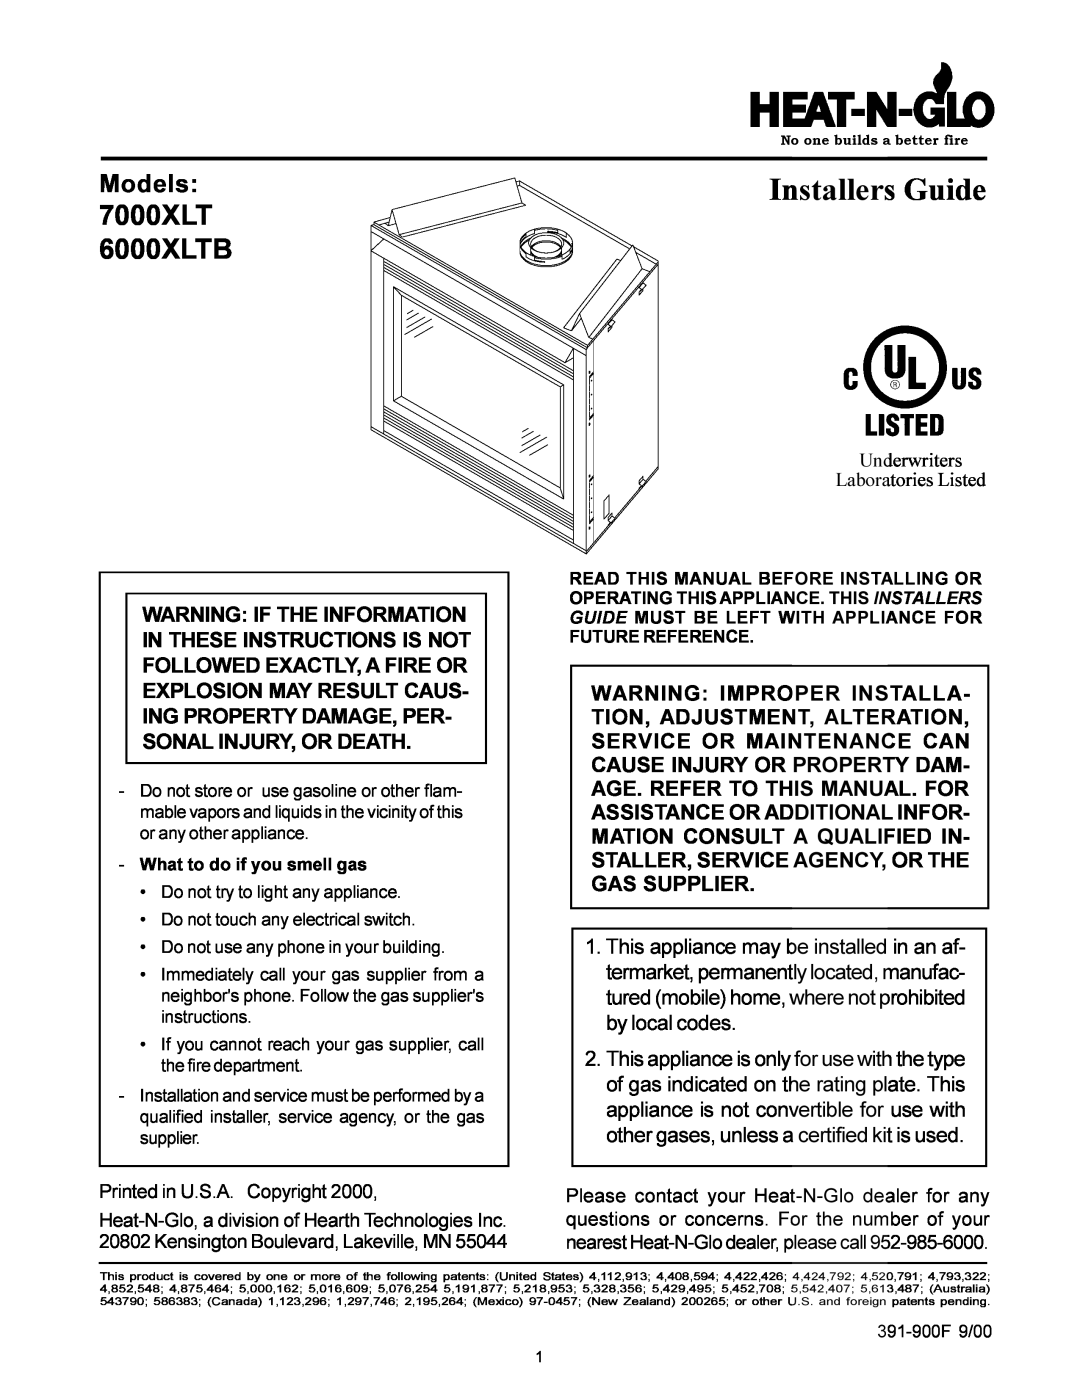 Heat & Glo LifeStyle 7000XLT manual Models, Underwriters Laboratories Listed, Installers Guide, 6000XLTB 